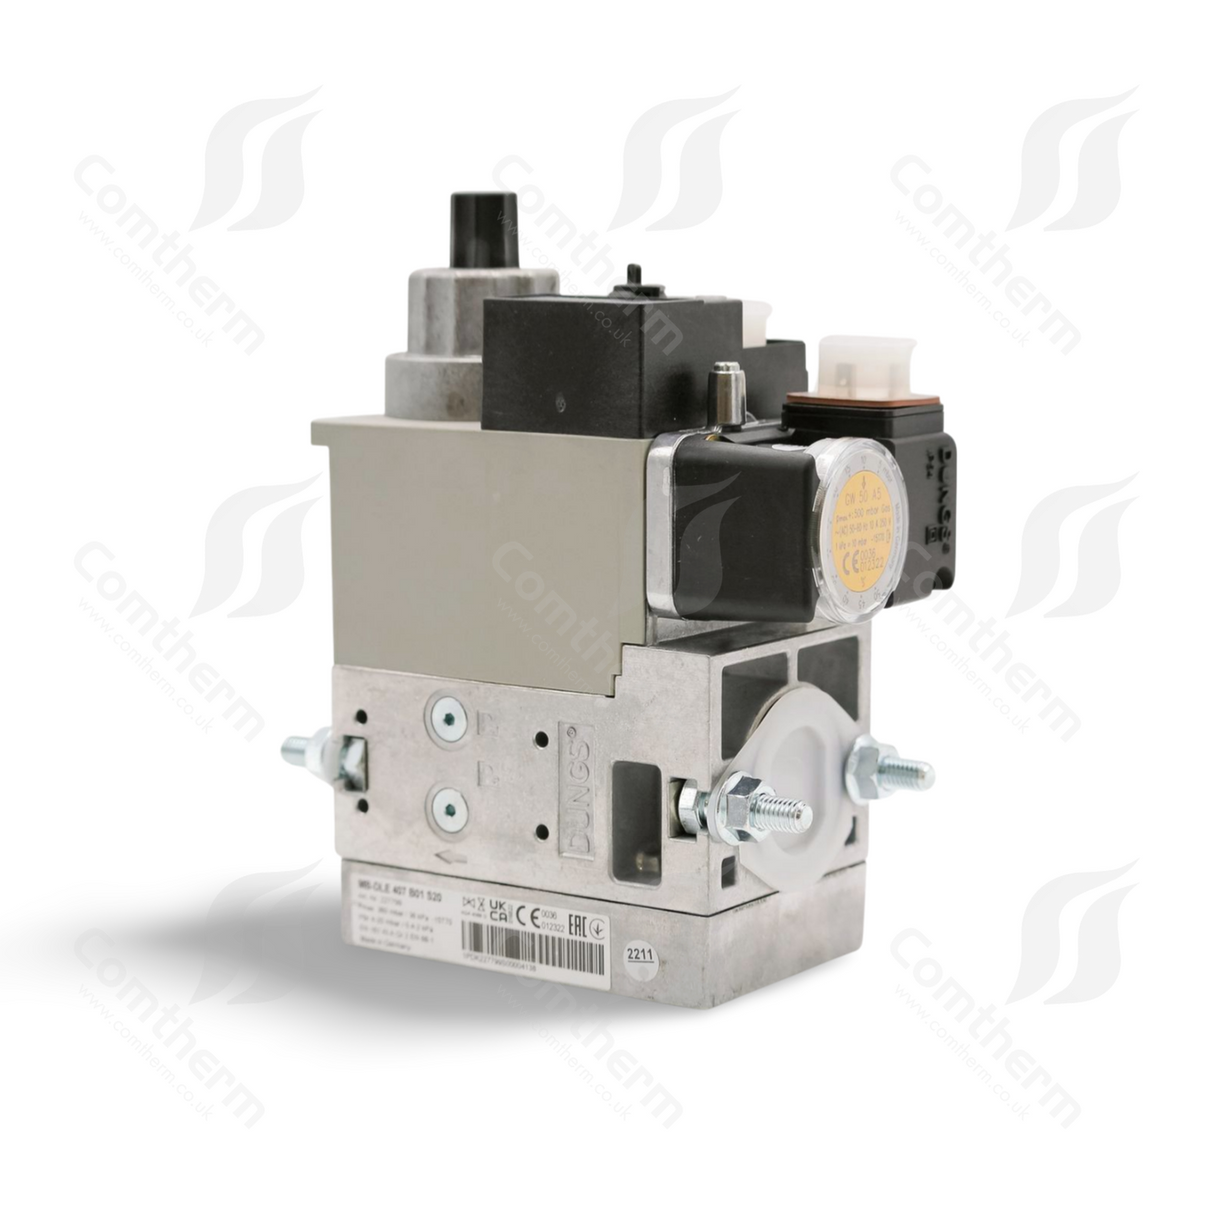 Dungs MB-DLE 407 B01 S20 + GW50A5 Multibloc Gas Valve - 110v